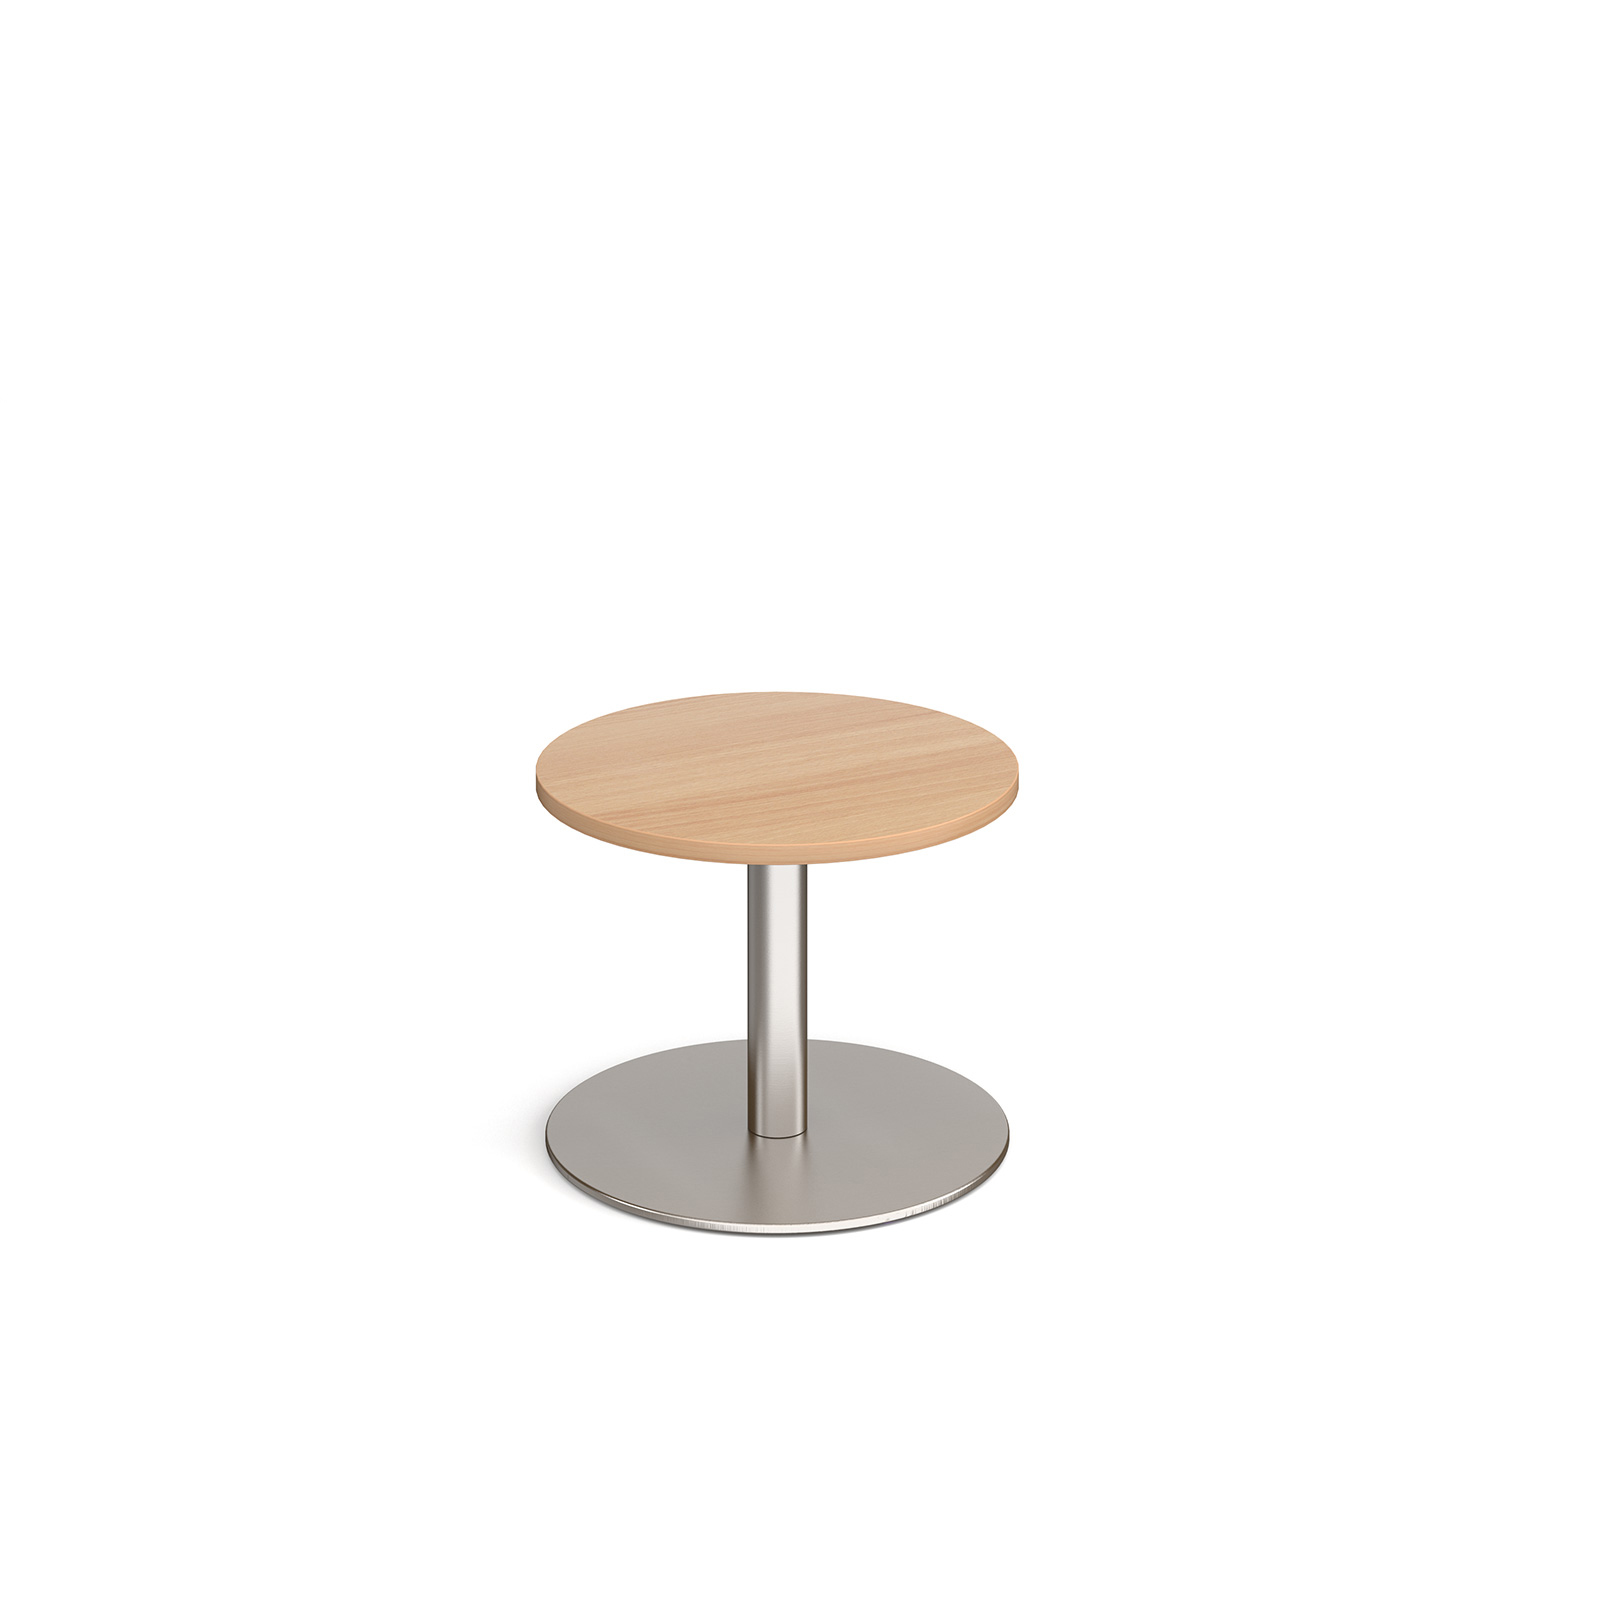 Monza circular coffee table with flat round brushed steel base 600mm - beech